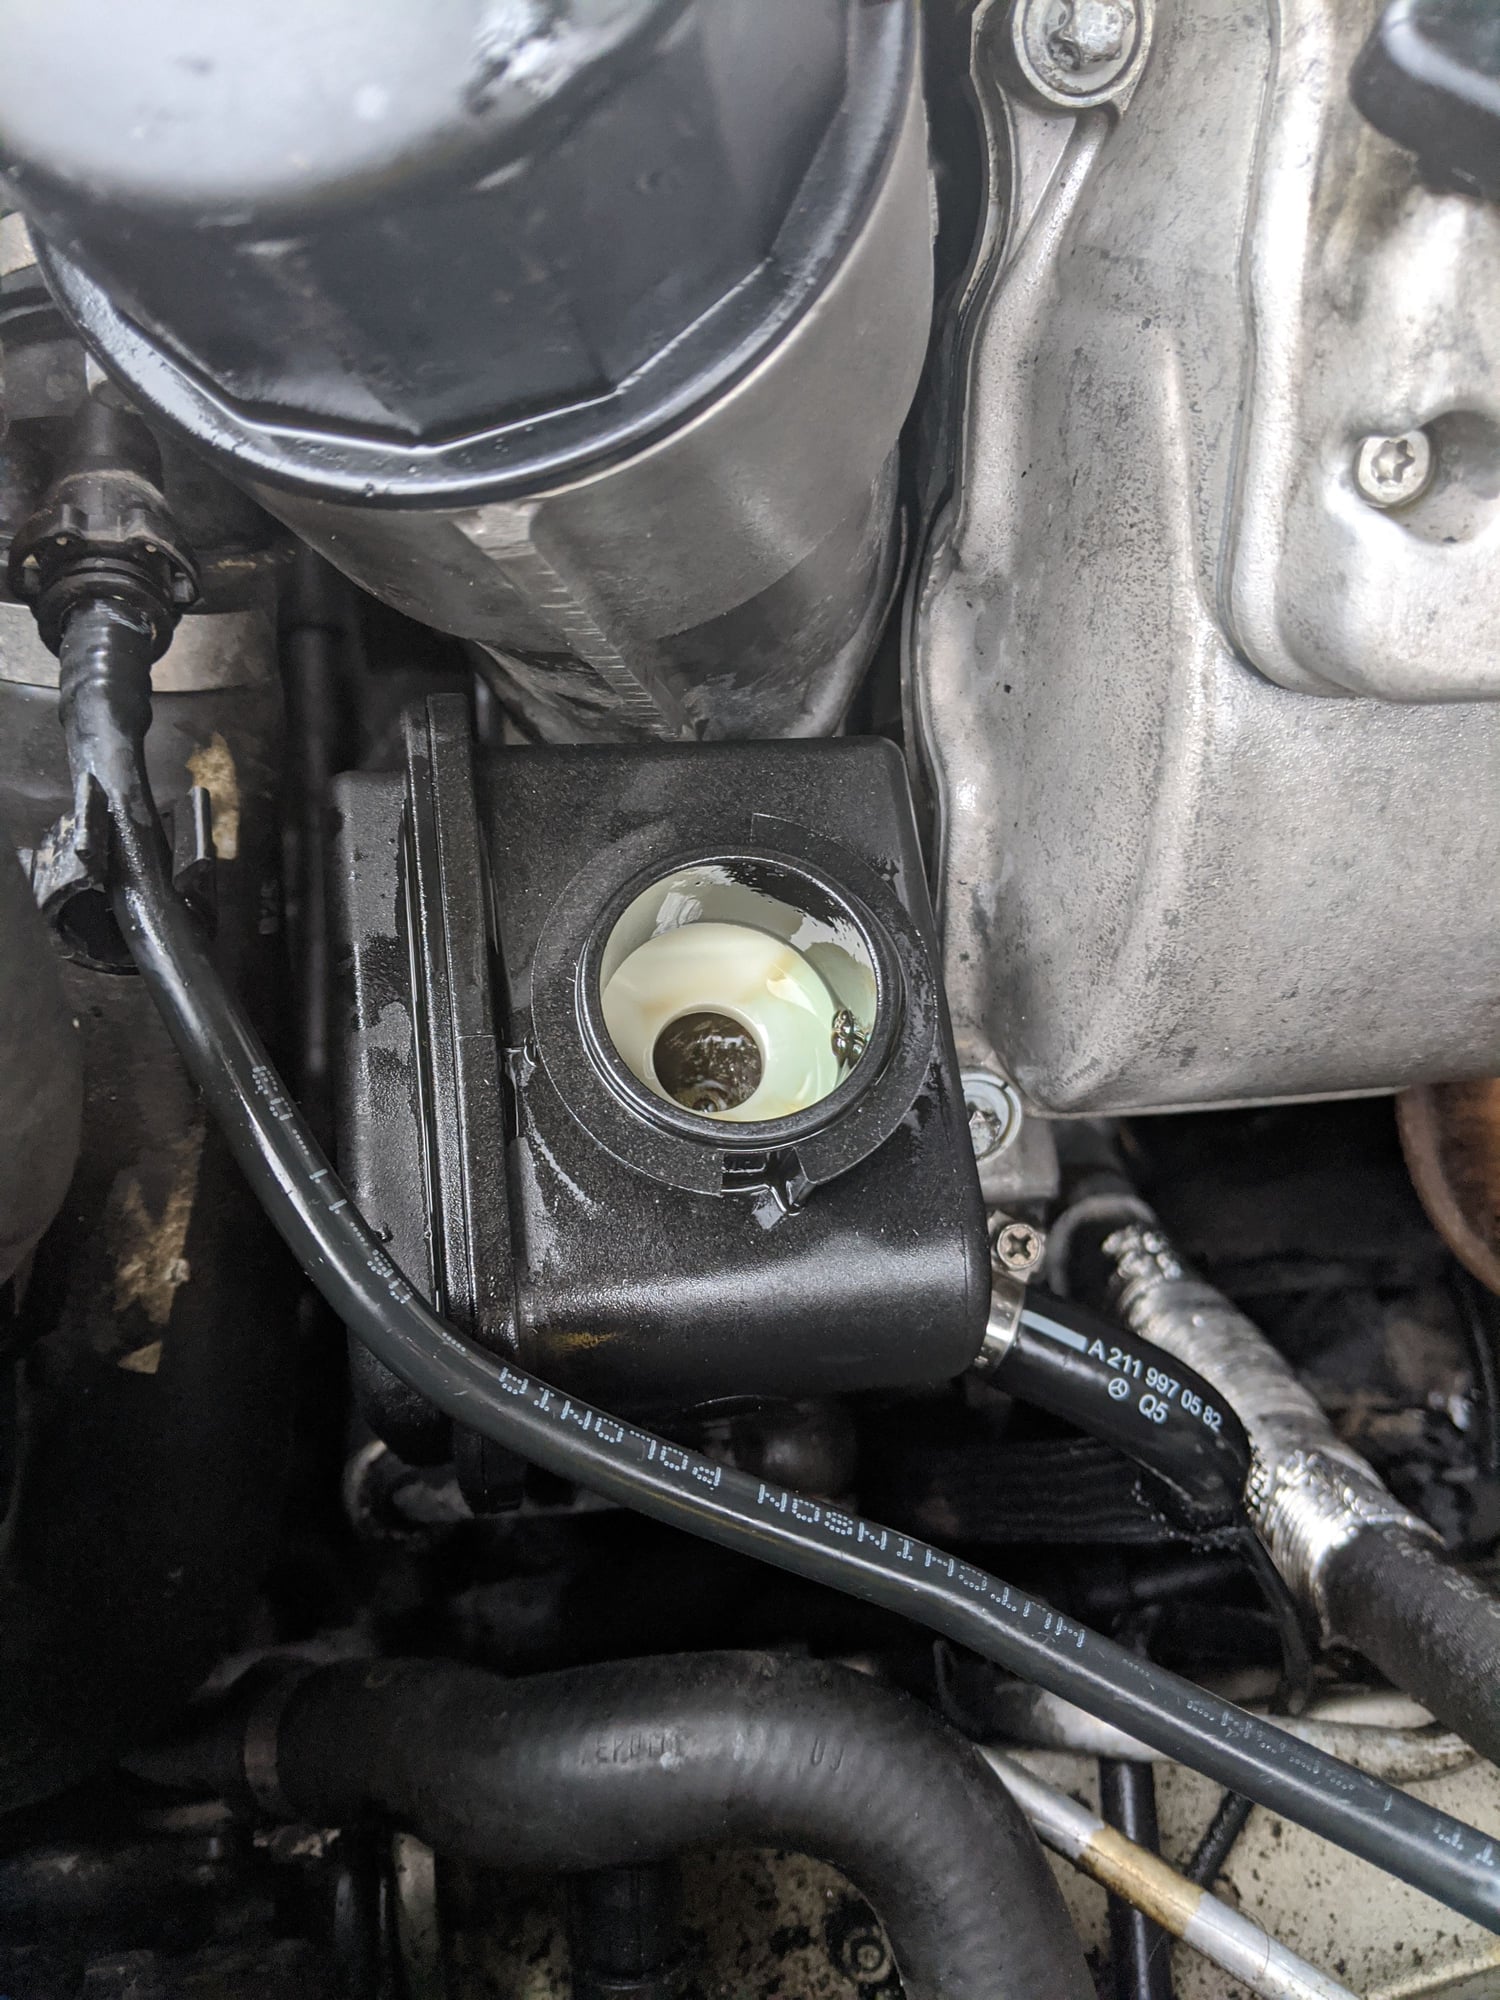 FAULTY steering pump causes hydraulic oil to leak out of the reservoir cap  